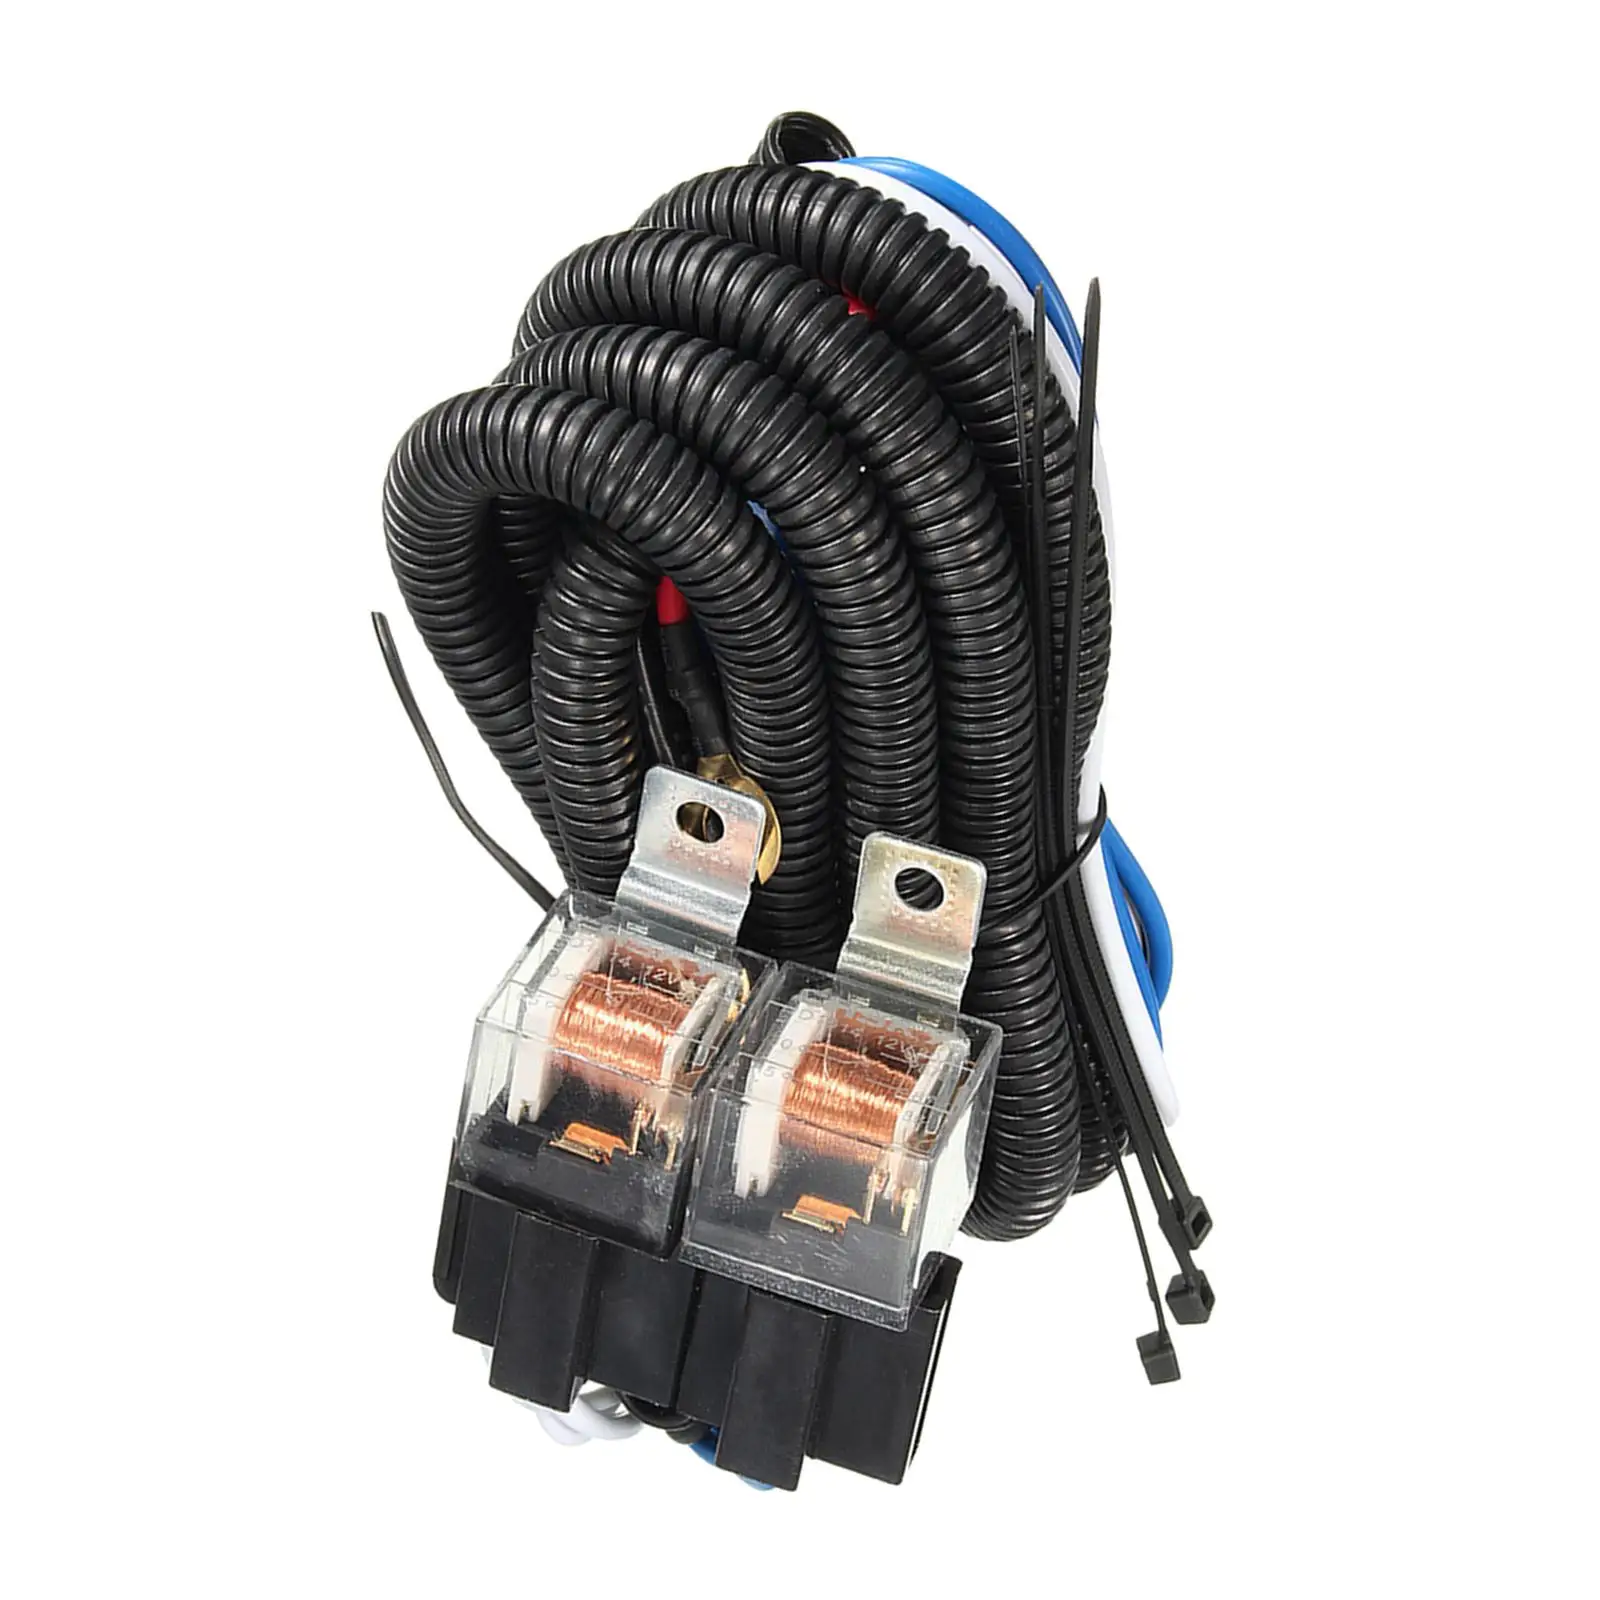 Vehicle H4 Headlight Relay Harness Accessories Easy Installation